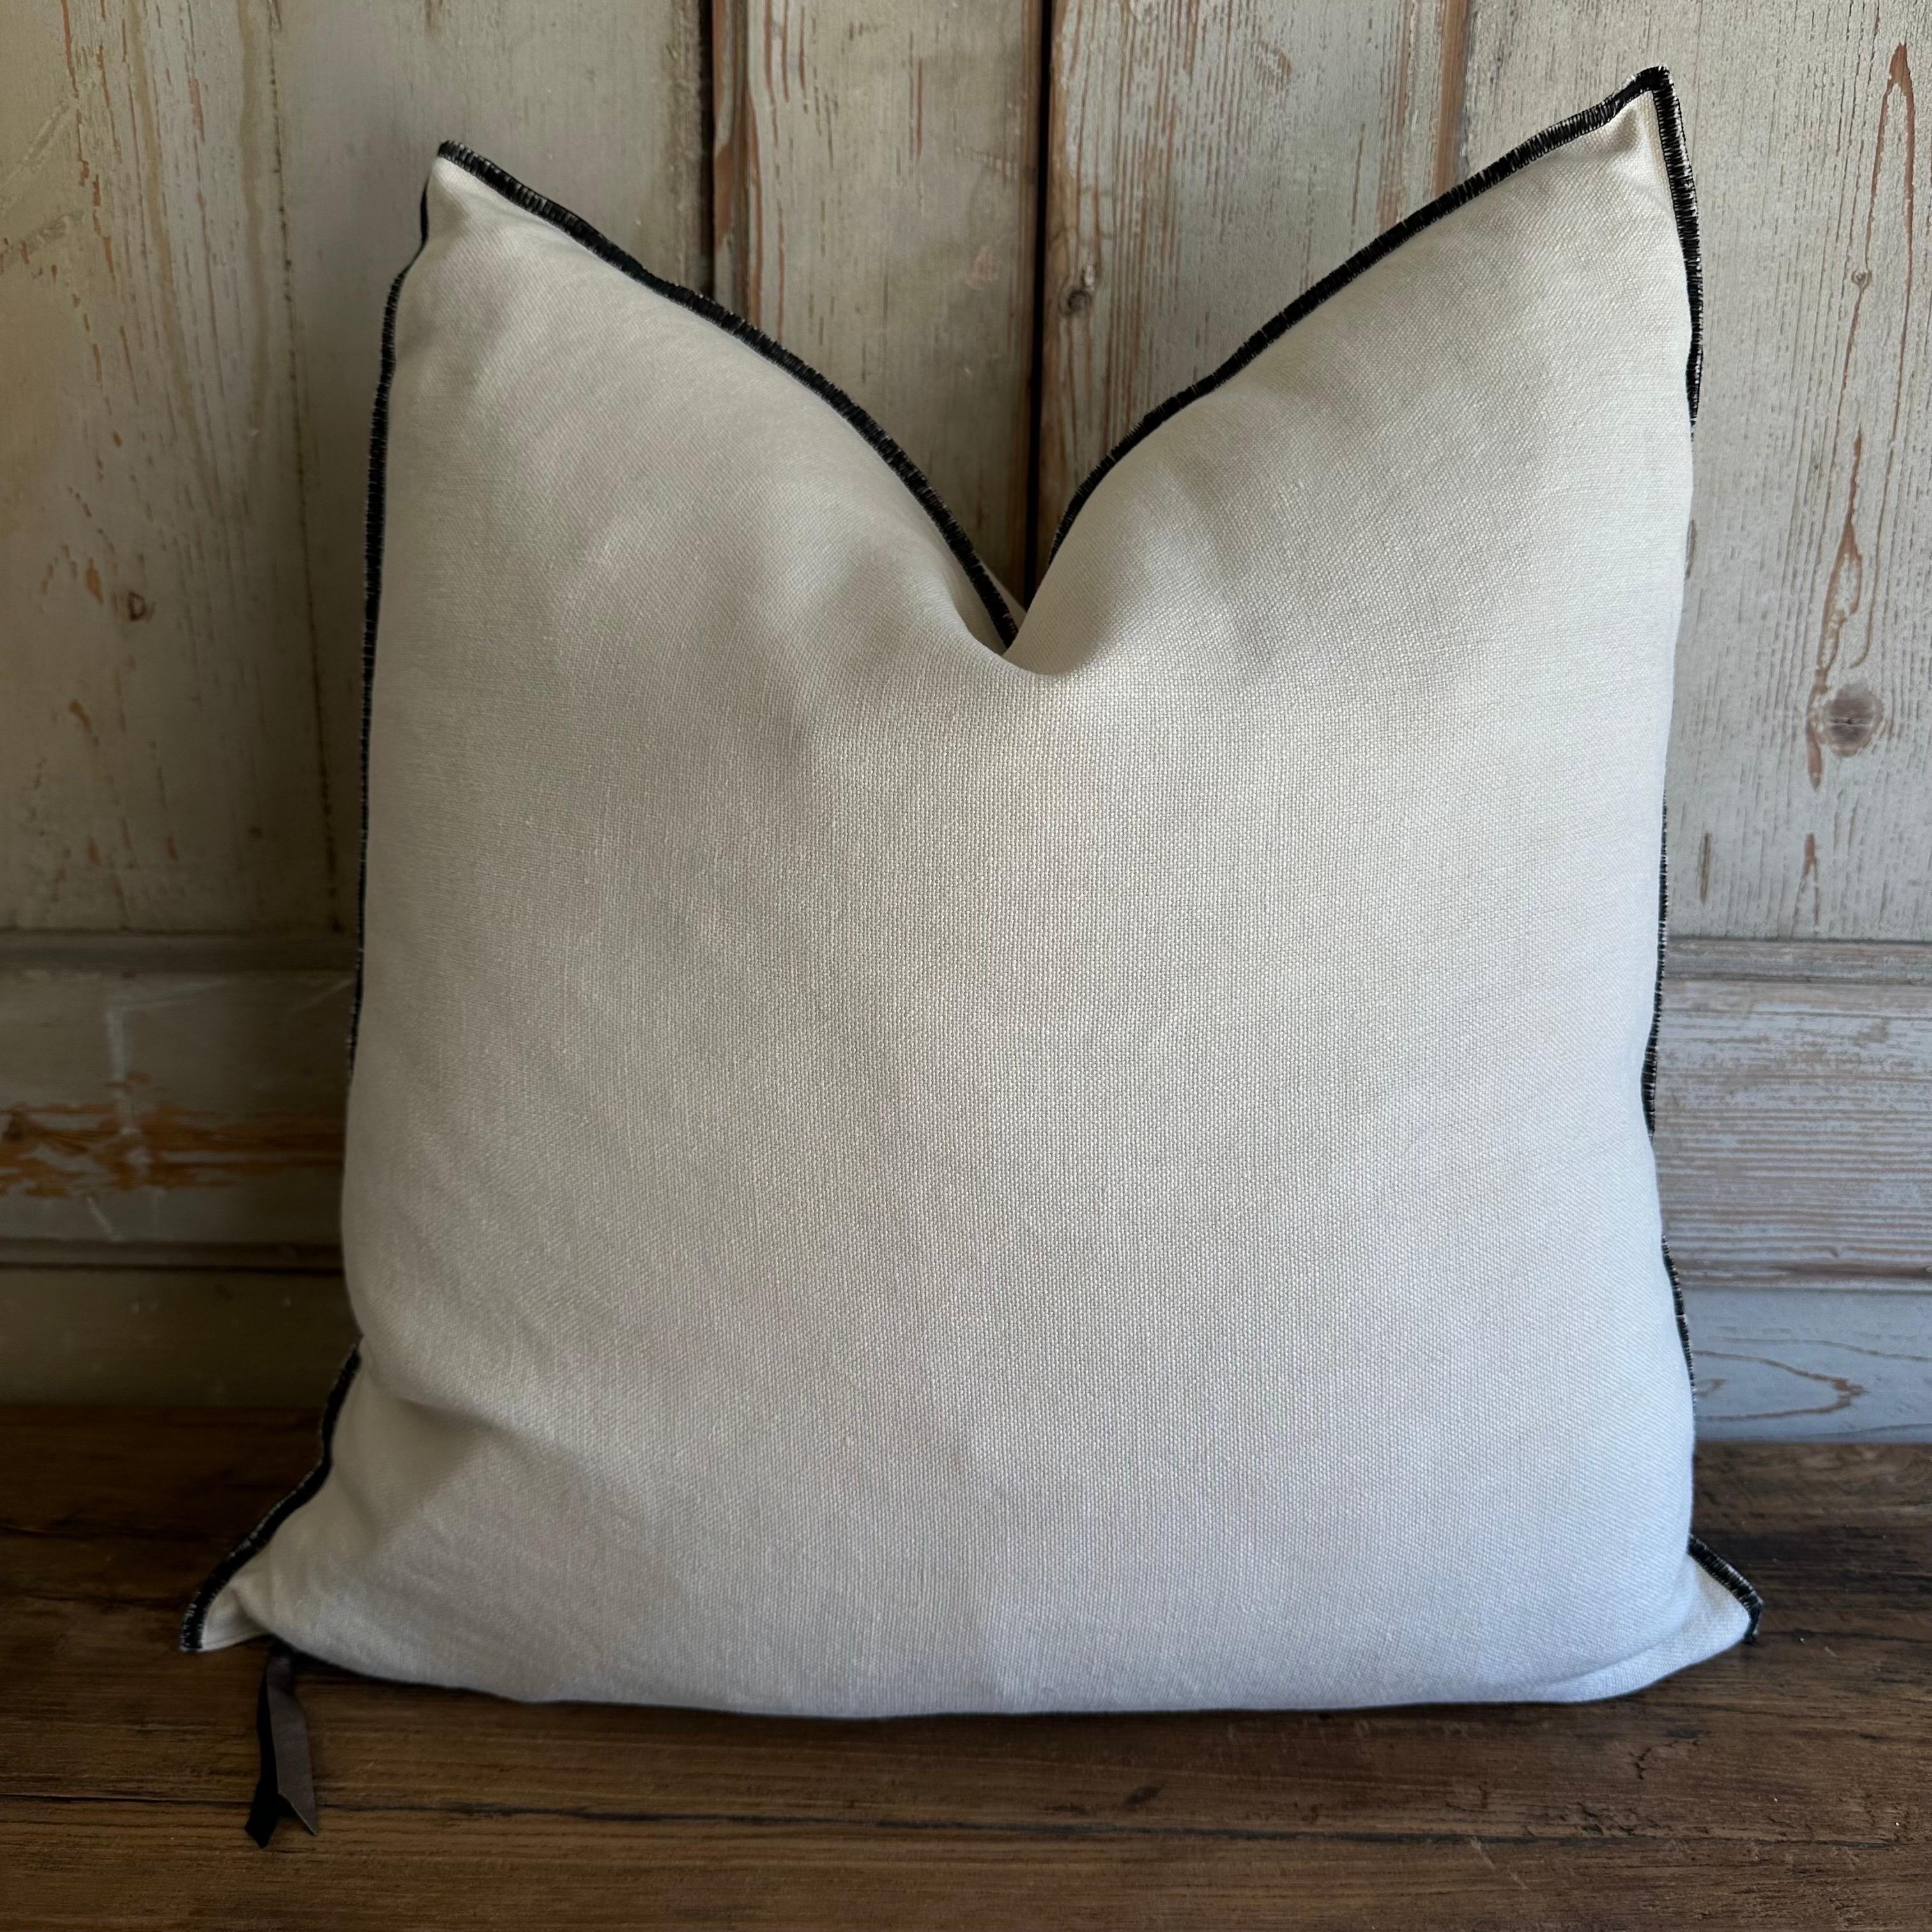 French Stone Washed Linen accent pillow with down feather insert.
Size: 22”x22”.
Color : Fior di latte (subtle nude / beige) nubby textured linen style pillow with a stitched edge, metal zipper closure. Shown in photo with white linen for